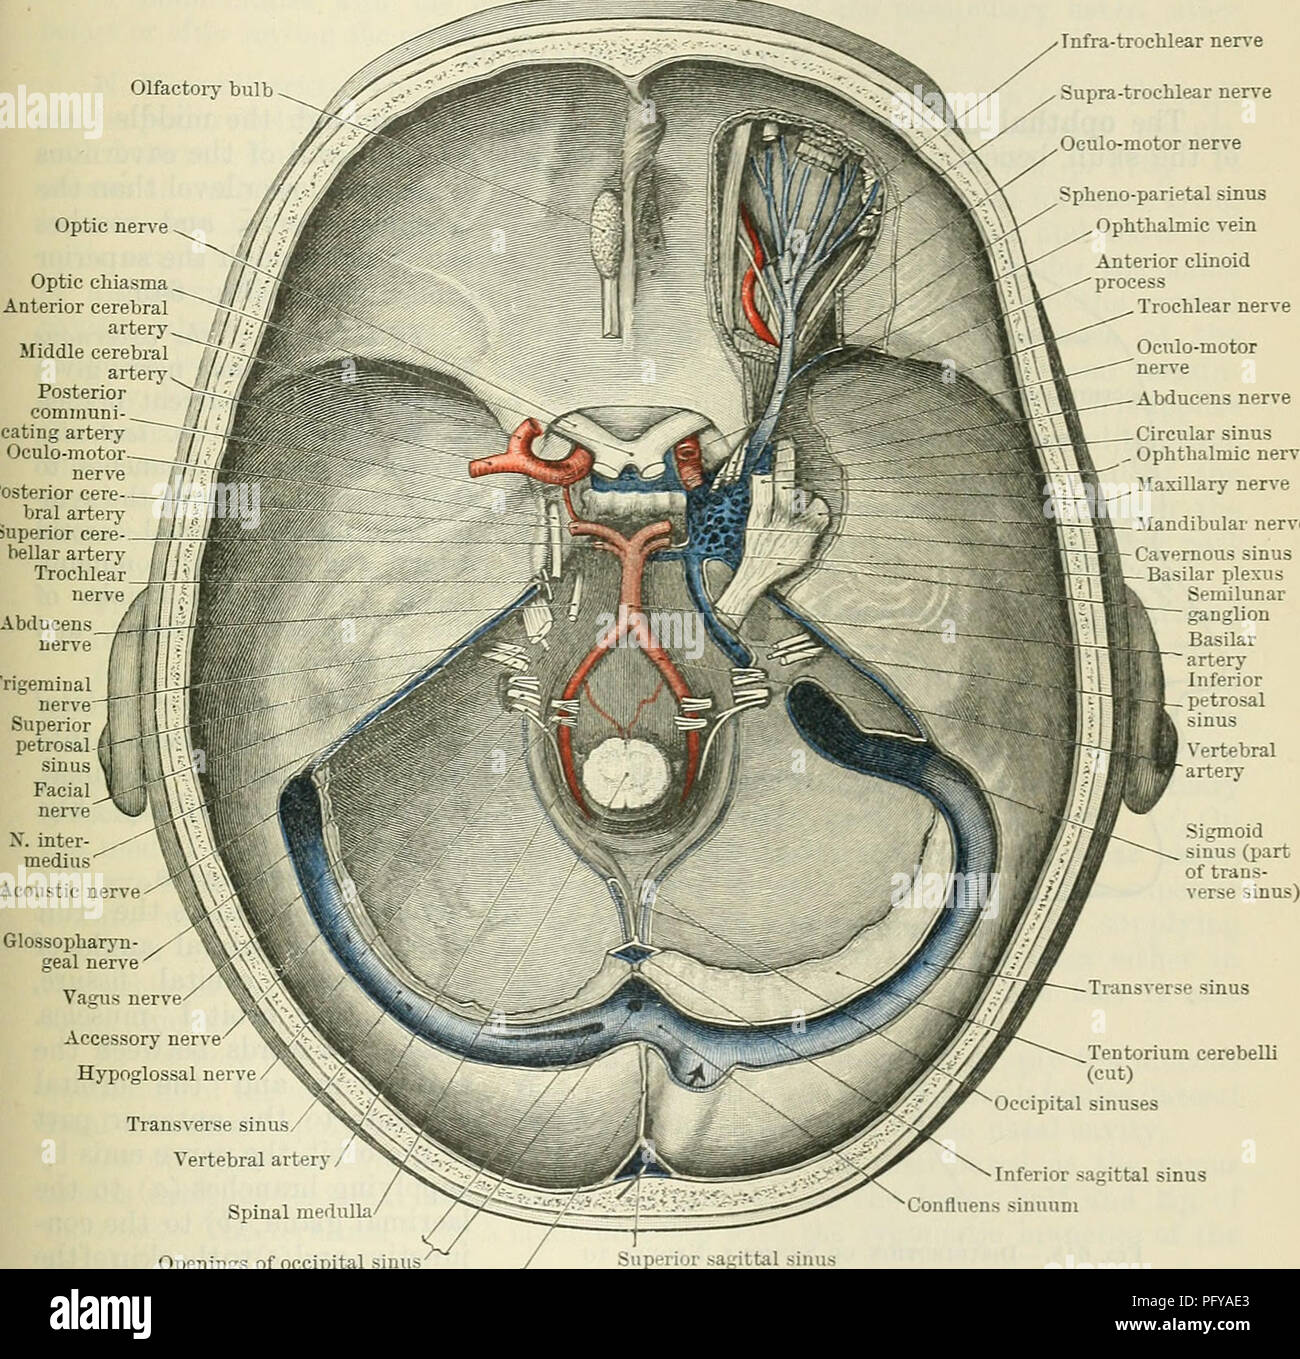 . Cunningham's Text-book of anatomy. Anatomy. TEOCHLEAE NEKVE. 771 motor nerve and the ophthalmic division of the trigeminal nerve. It enters the orbit above the muscles of the eyeball, and terminates in the orbital (superior) surface of the superior oblique muscle. Communications.—In the cavernous sinus the nerve receives (1) a communicating Olfactory bulb. Optic nerve Optic chiasma Anterior cerebral artery Middle cerebra artery Posterior communi- cating artery Oculo-motor nerve Posterior cere- bral artery Superior cere- bellar artery Trochlear nerve Abducens nerve Trigemina nerve&quot;-!&quo Stock Photo